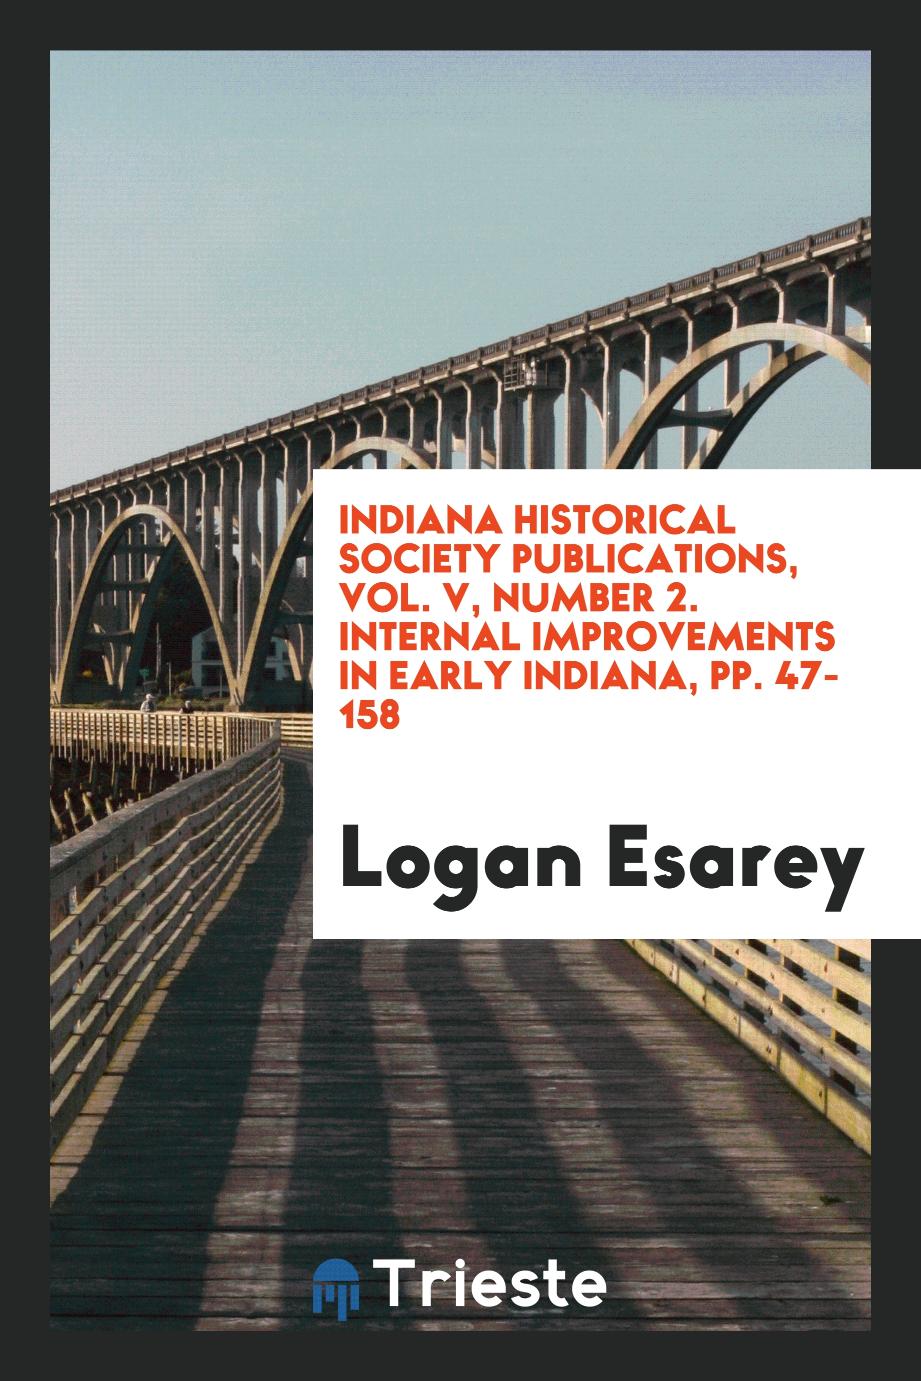 Indiana Historical Society Publications, Vol. V, Number 2. Internal Improvements in Early Indiana, pp. 47-158